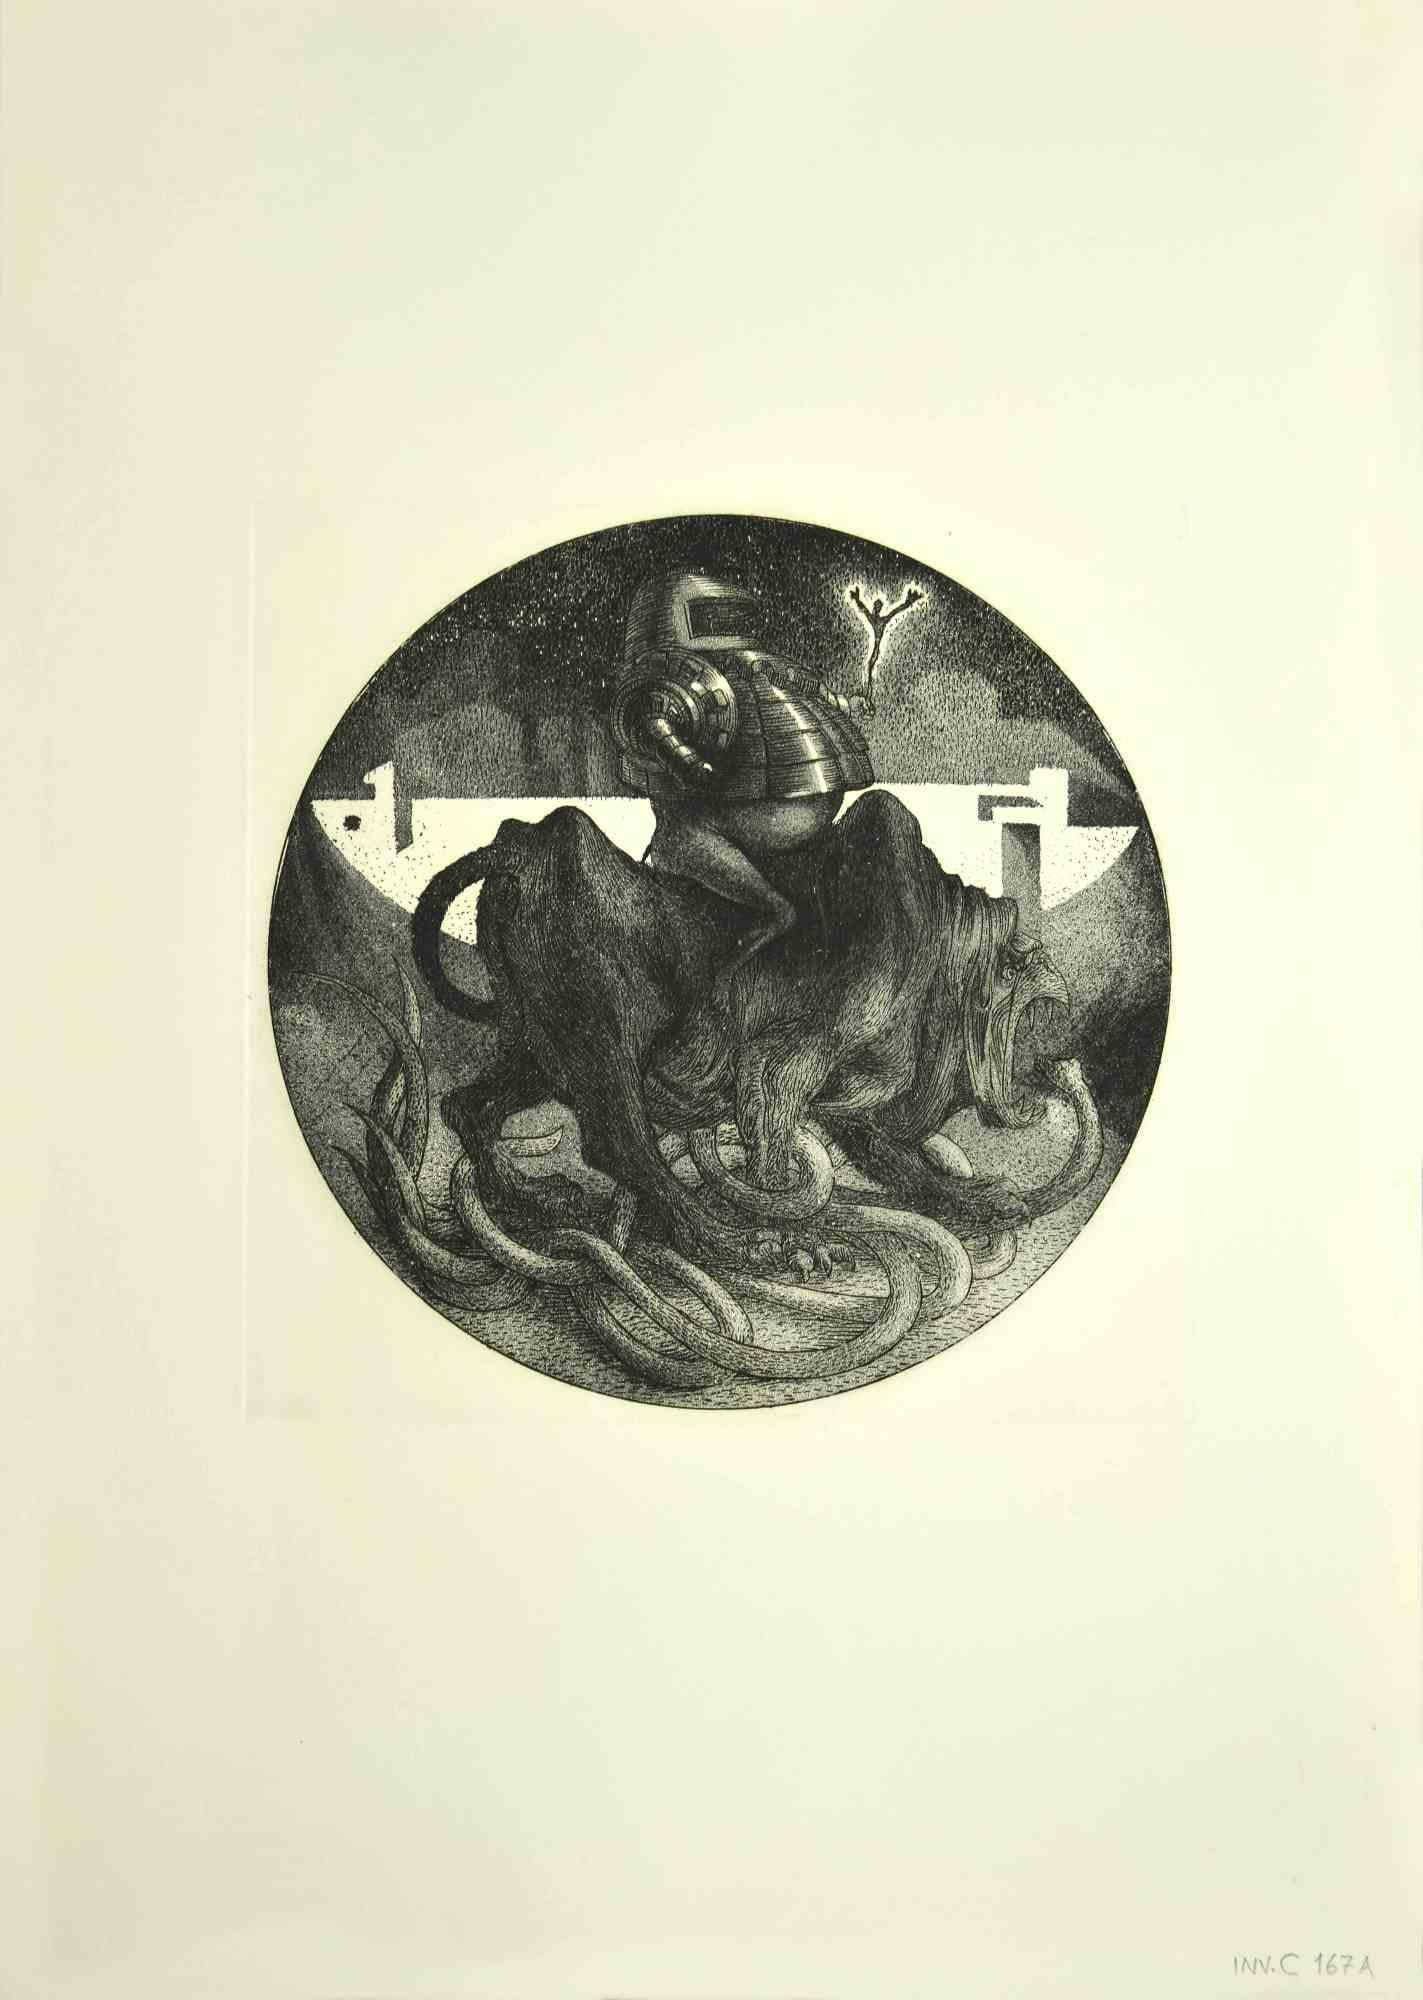 Eroe Vittorioso is an original artwork realized  in 1971  by the italian Contemporary artist  Leo Guida  (1992 - 2017).

Original black and white etching on ivory-colored cardboard.

Not signed.

In this artwork is represented an victorious